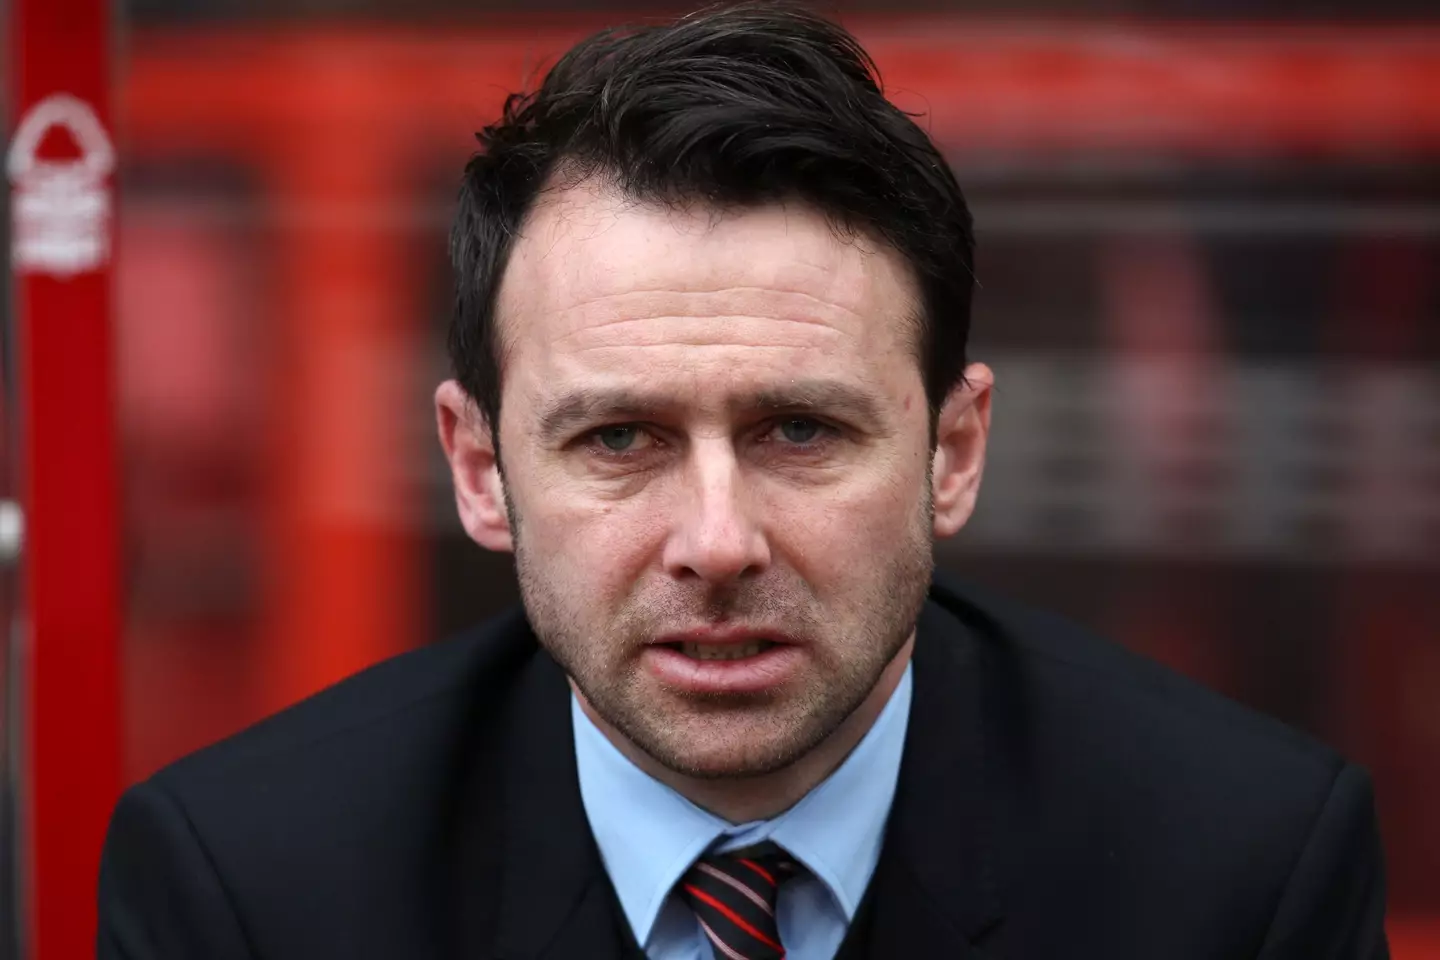 Could Dougie Freedman join Manchester United? Image: Getty 